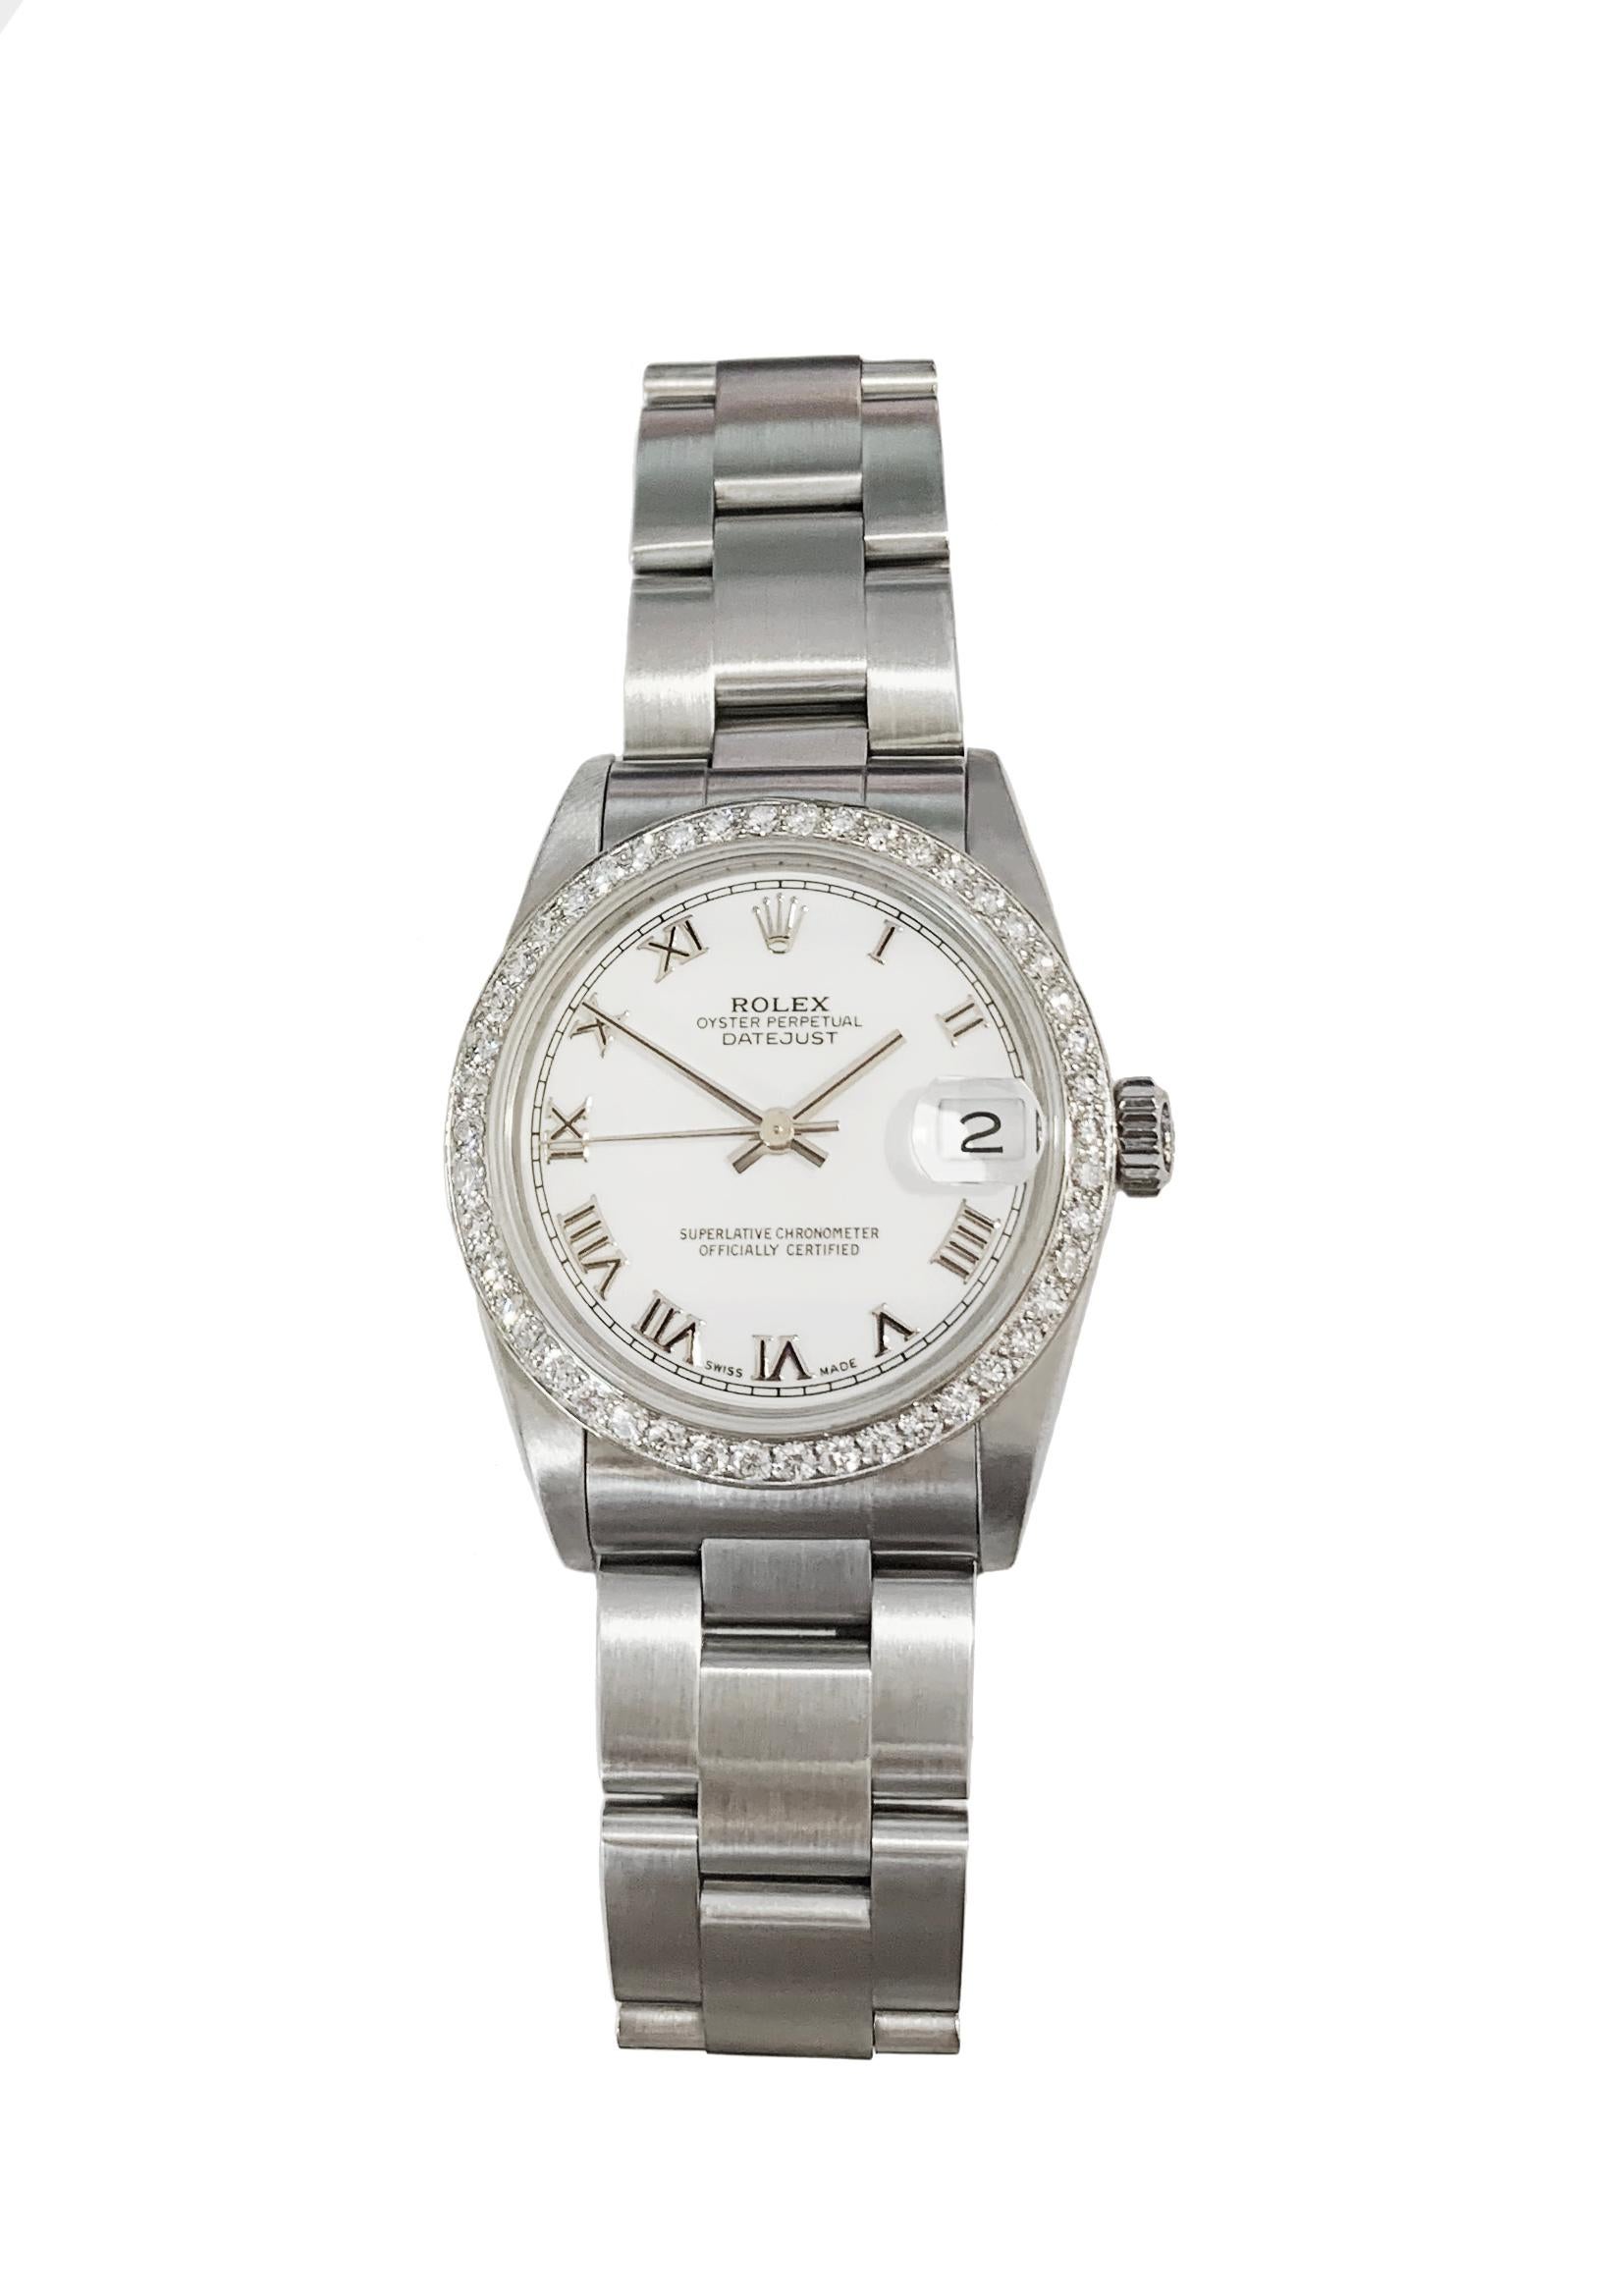 -Year: 1997
-Mint condition
-Case size: 31mm
-Dial: White 
-Crystal: Sapphire
-Oyster bracelet 
-Aftermarket Diamond Bezel: 1.00ct, VS clarity, G color
-Comes with box, no papers 
